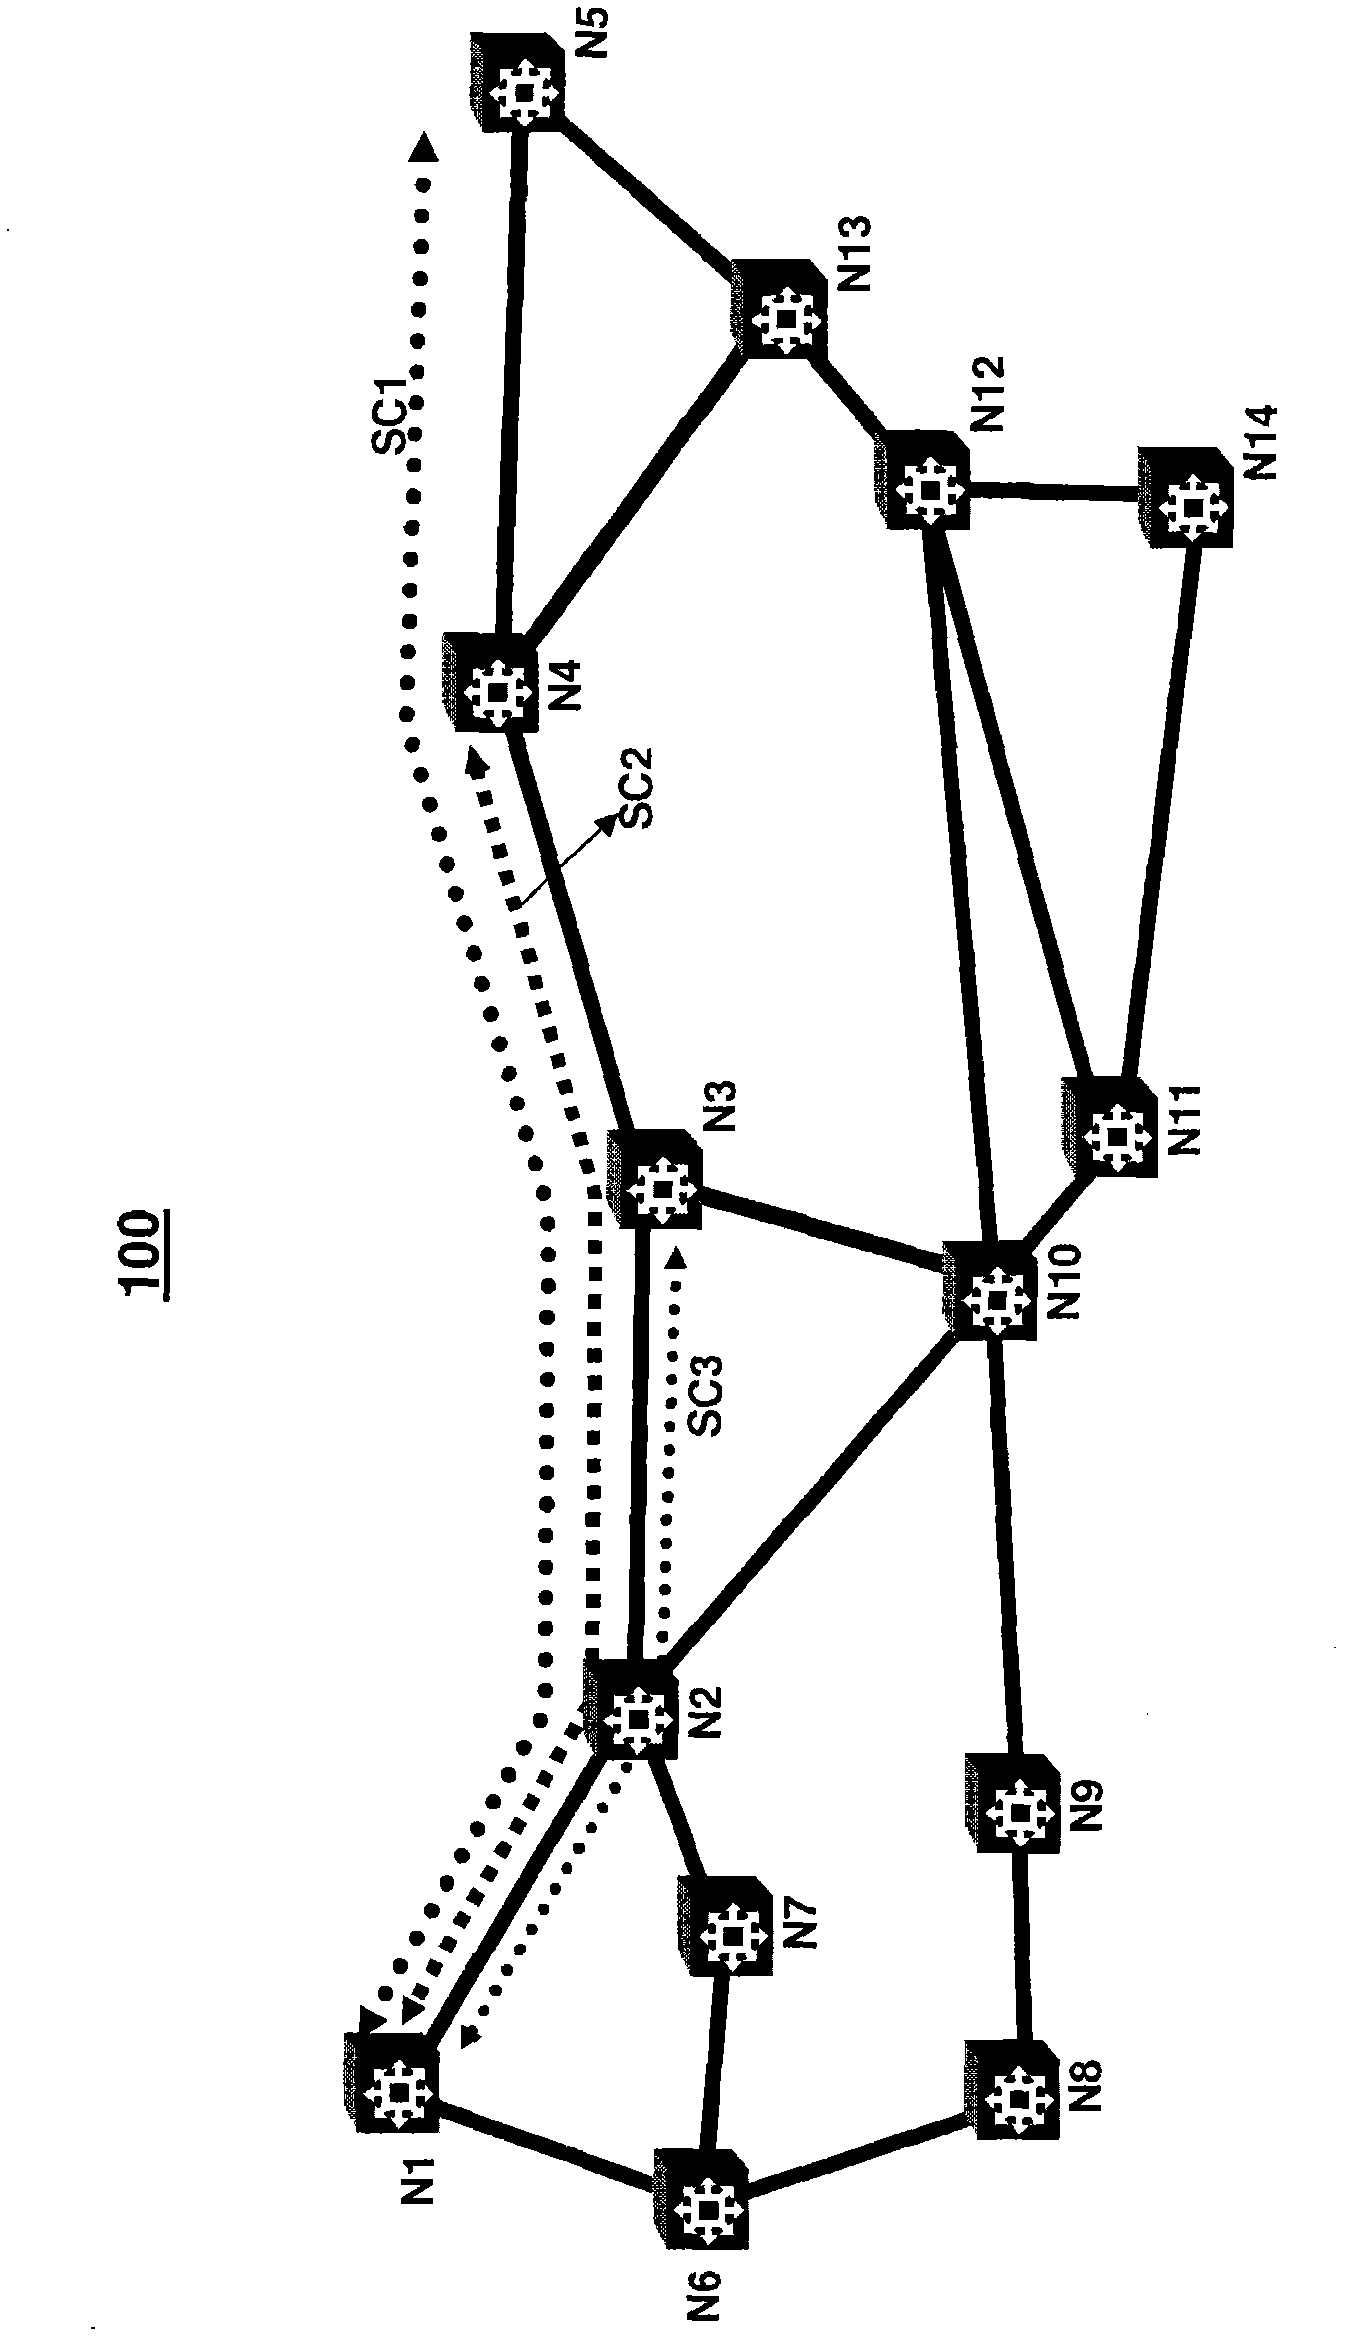 Multiplexer and modulation arrangements for multi-carrier optical modems